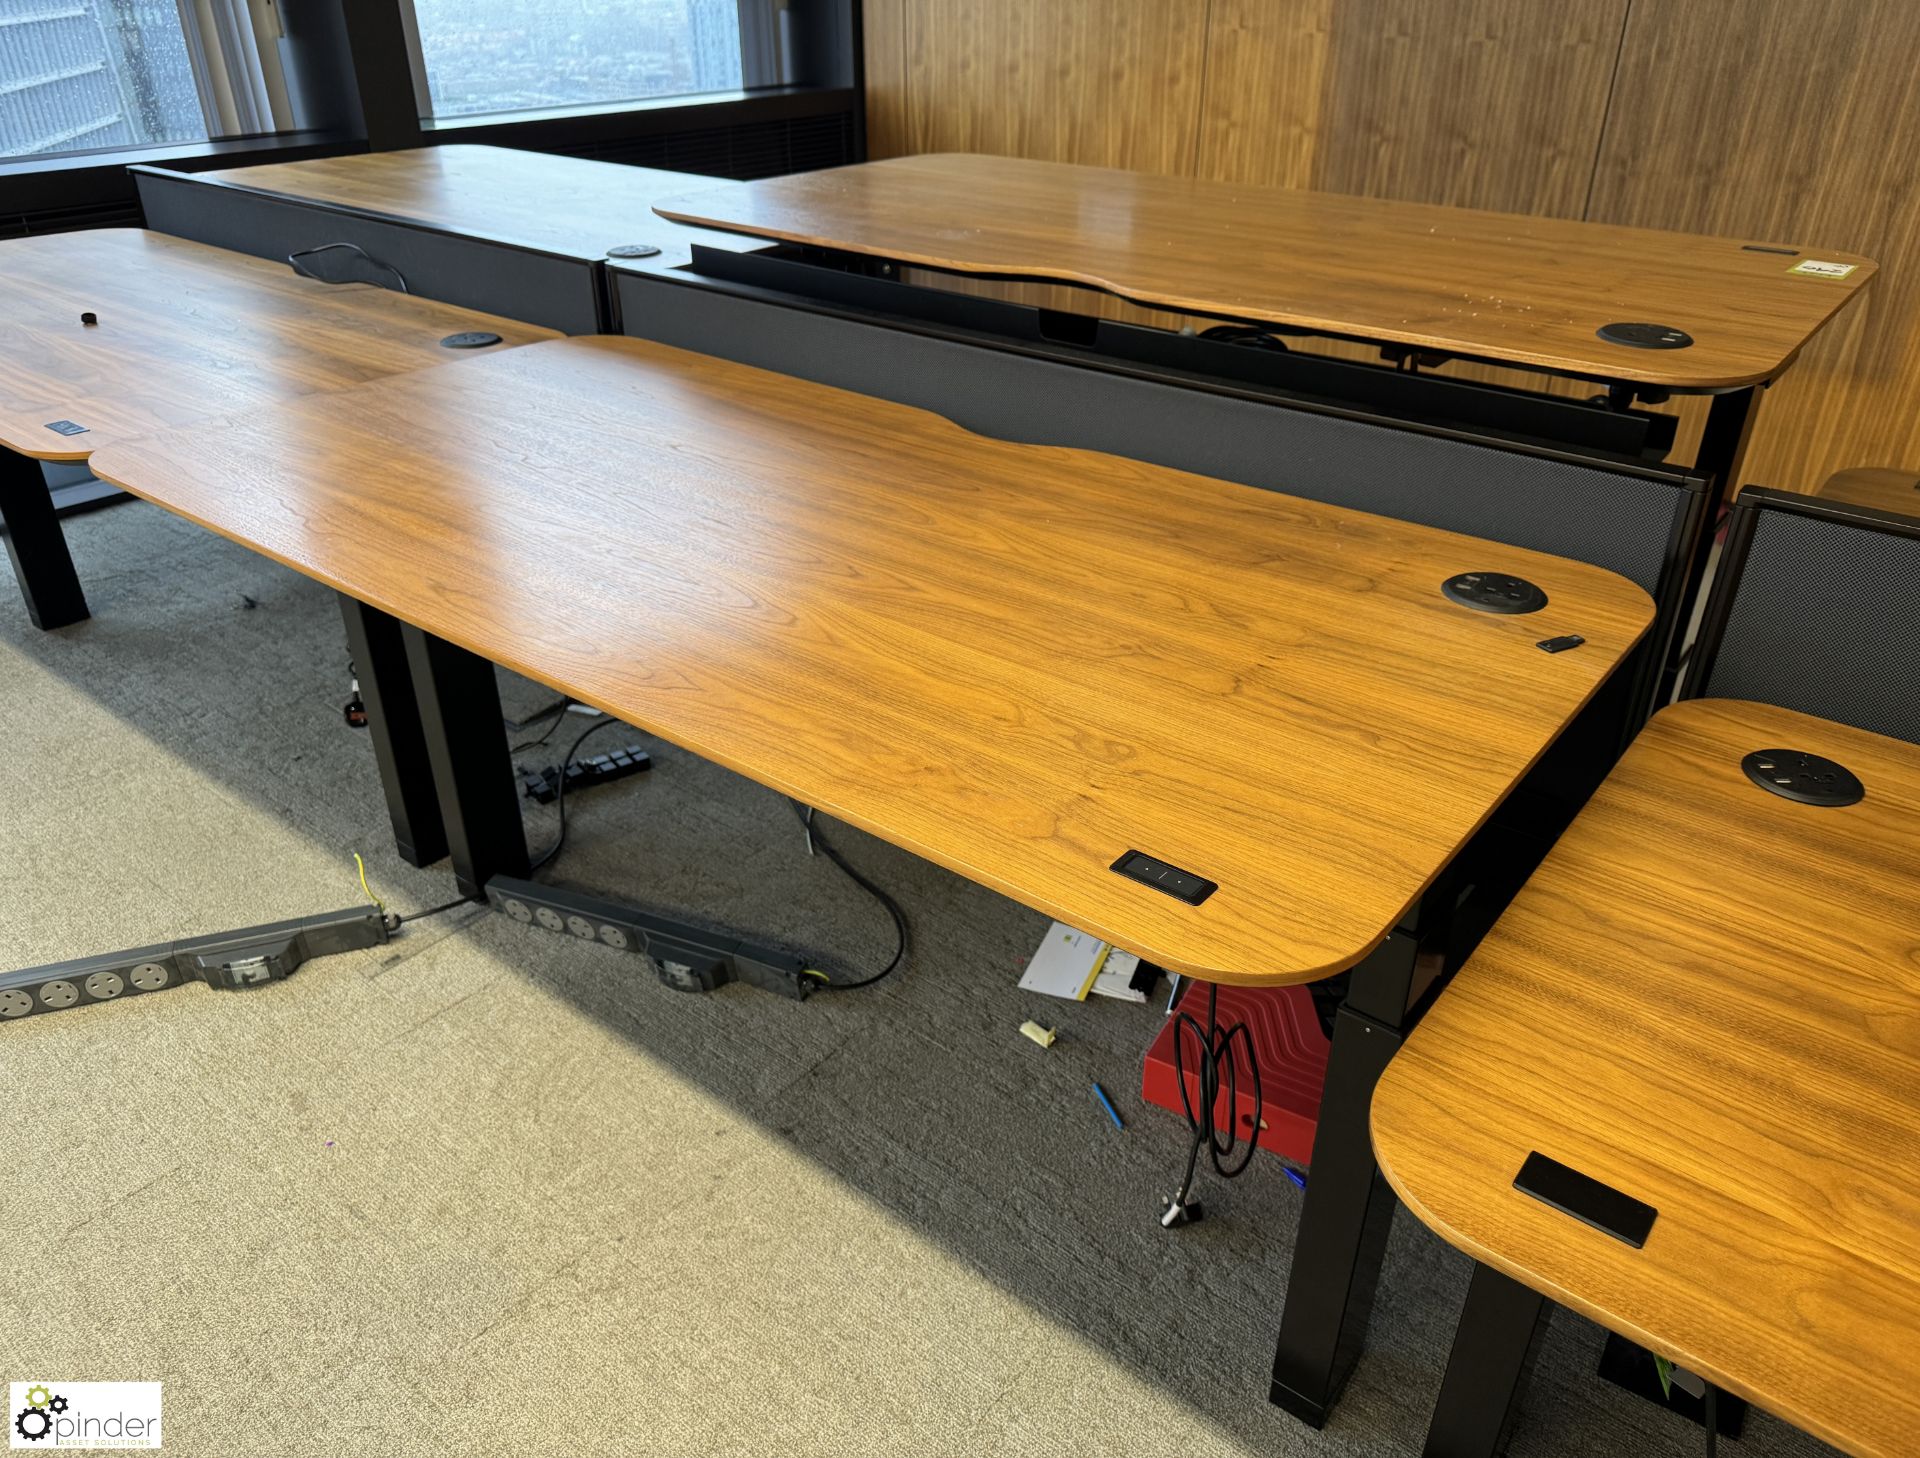 OMT back to back powered rise and fall Desks, 1600mm x 800mm per desk leaf, cherry veneer,with